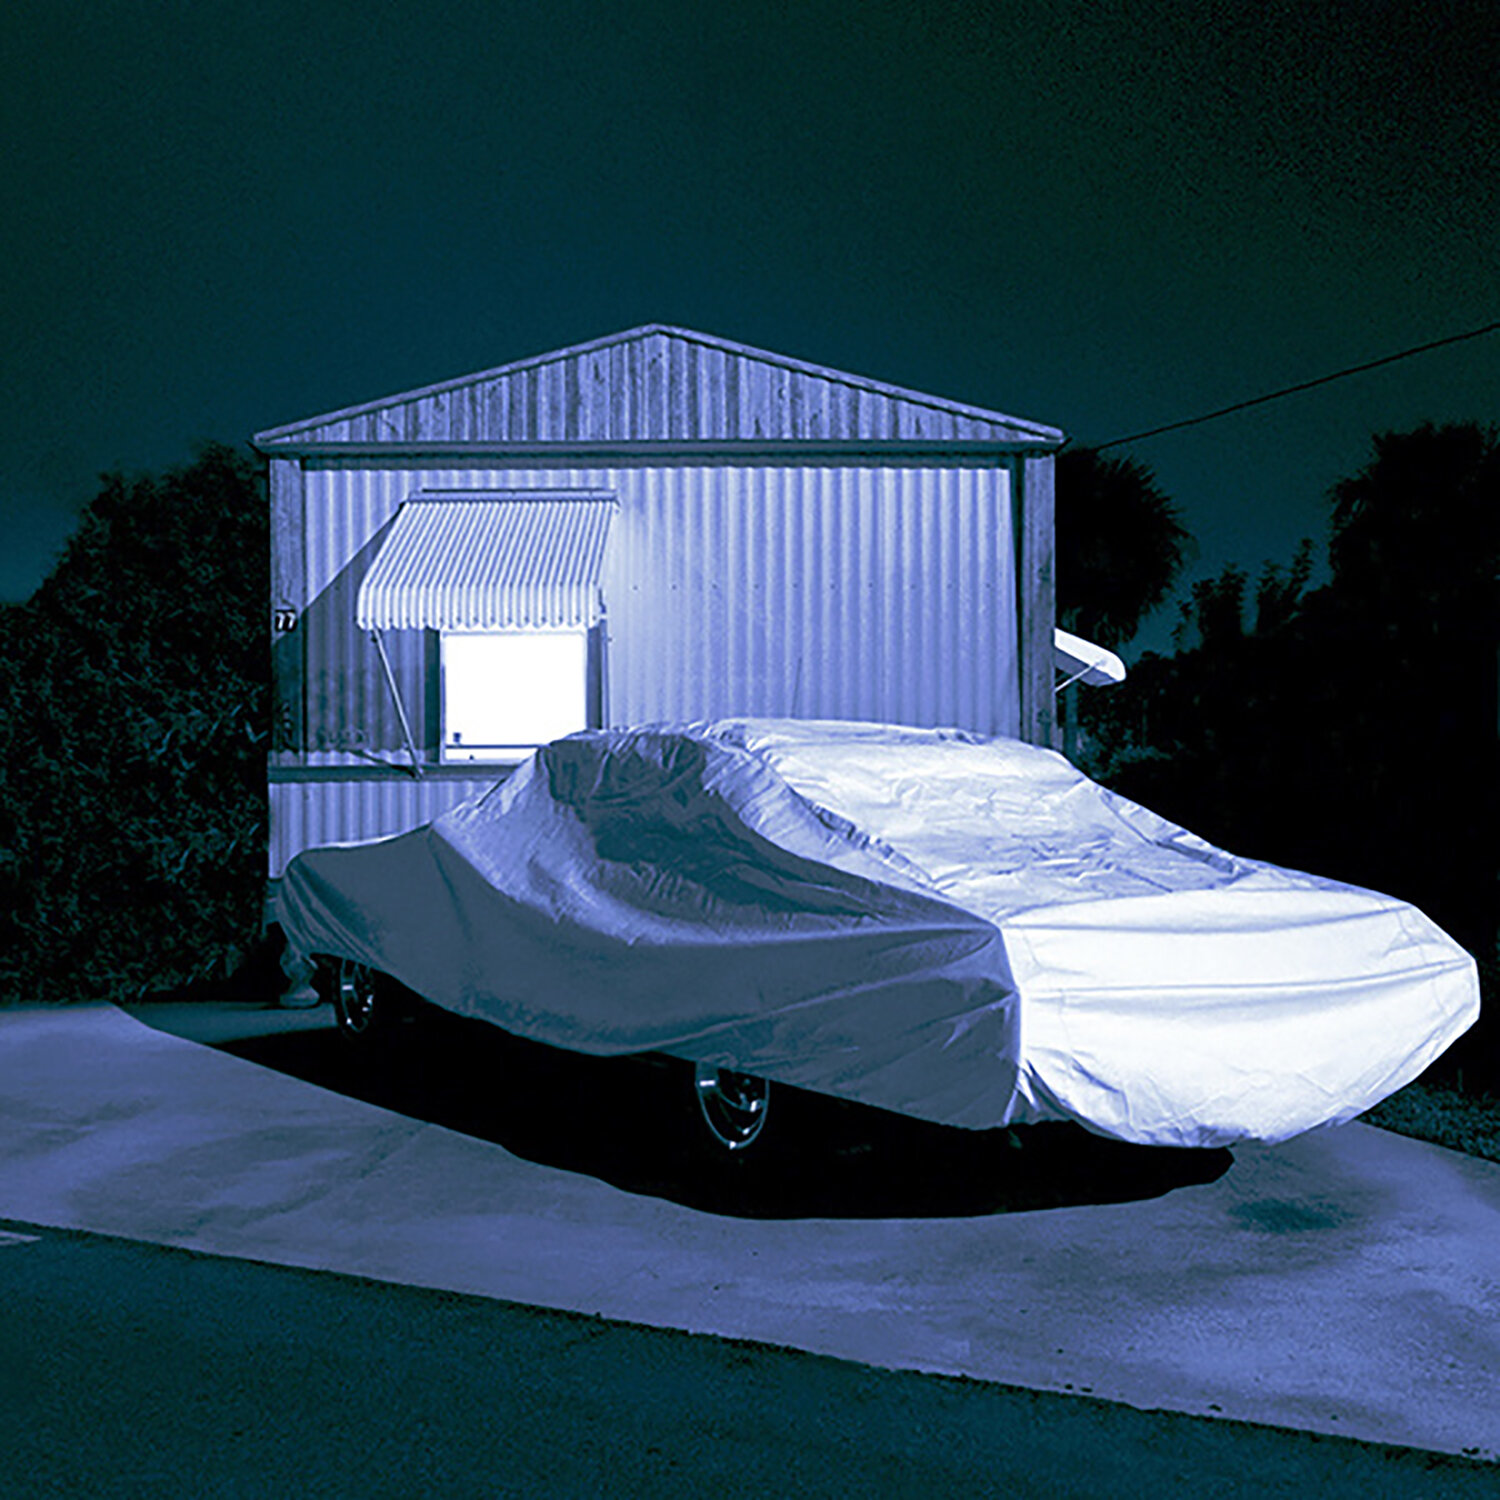 JUDY GELLES | Mobile Home #9, 15 x 15 inches / 38 x 38 cm, Fuji crystal archive print, edition of 10, 2001-2006